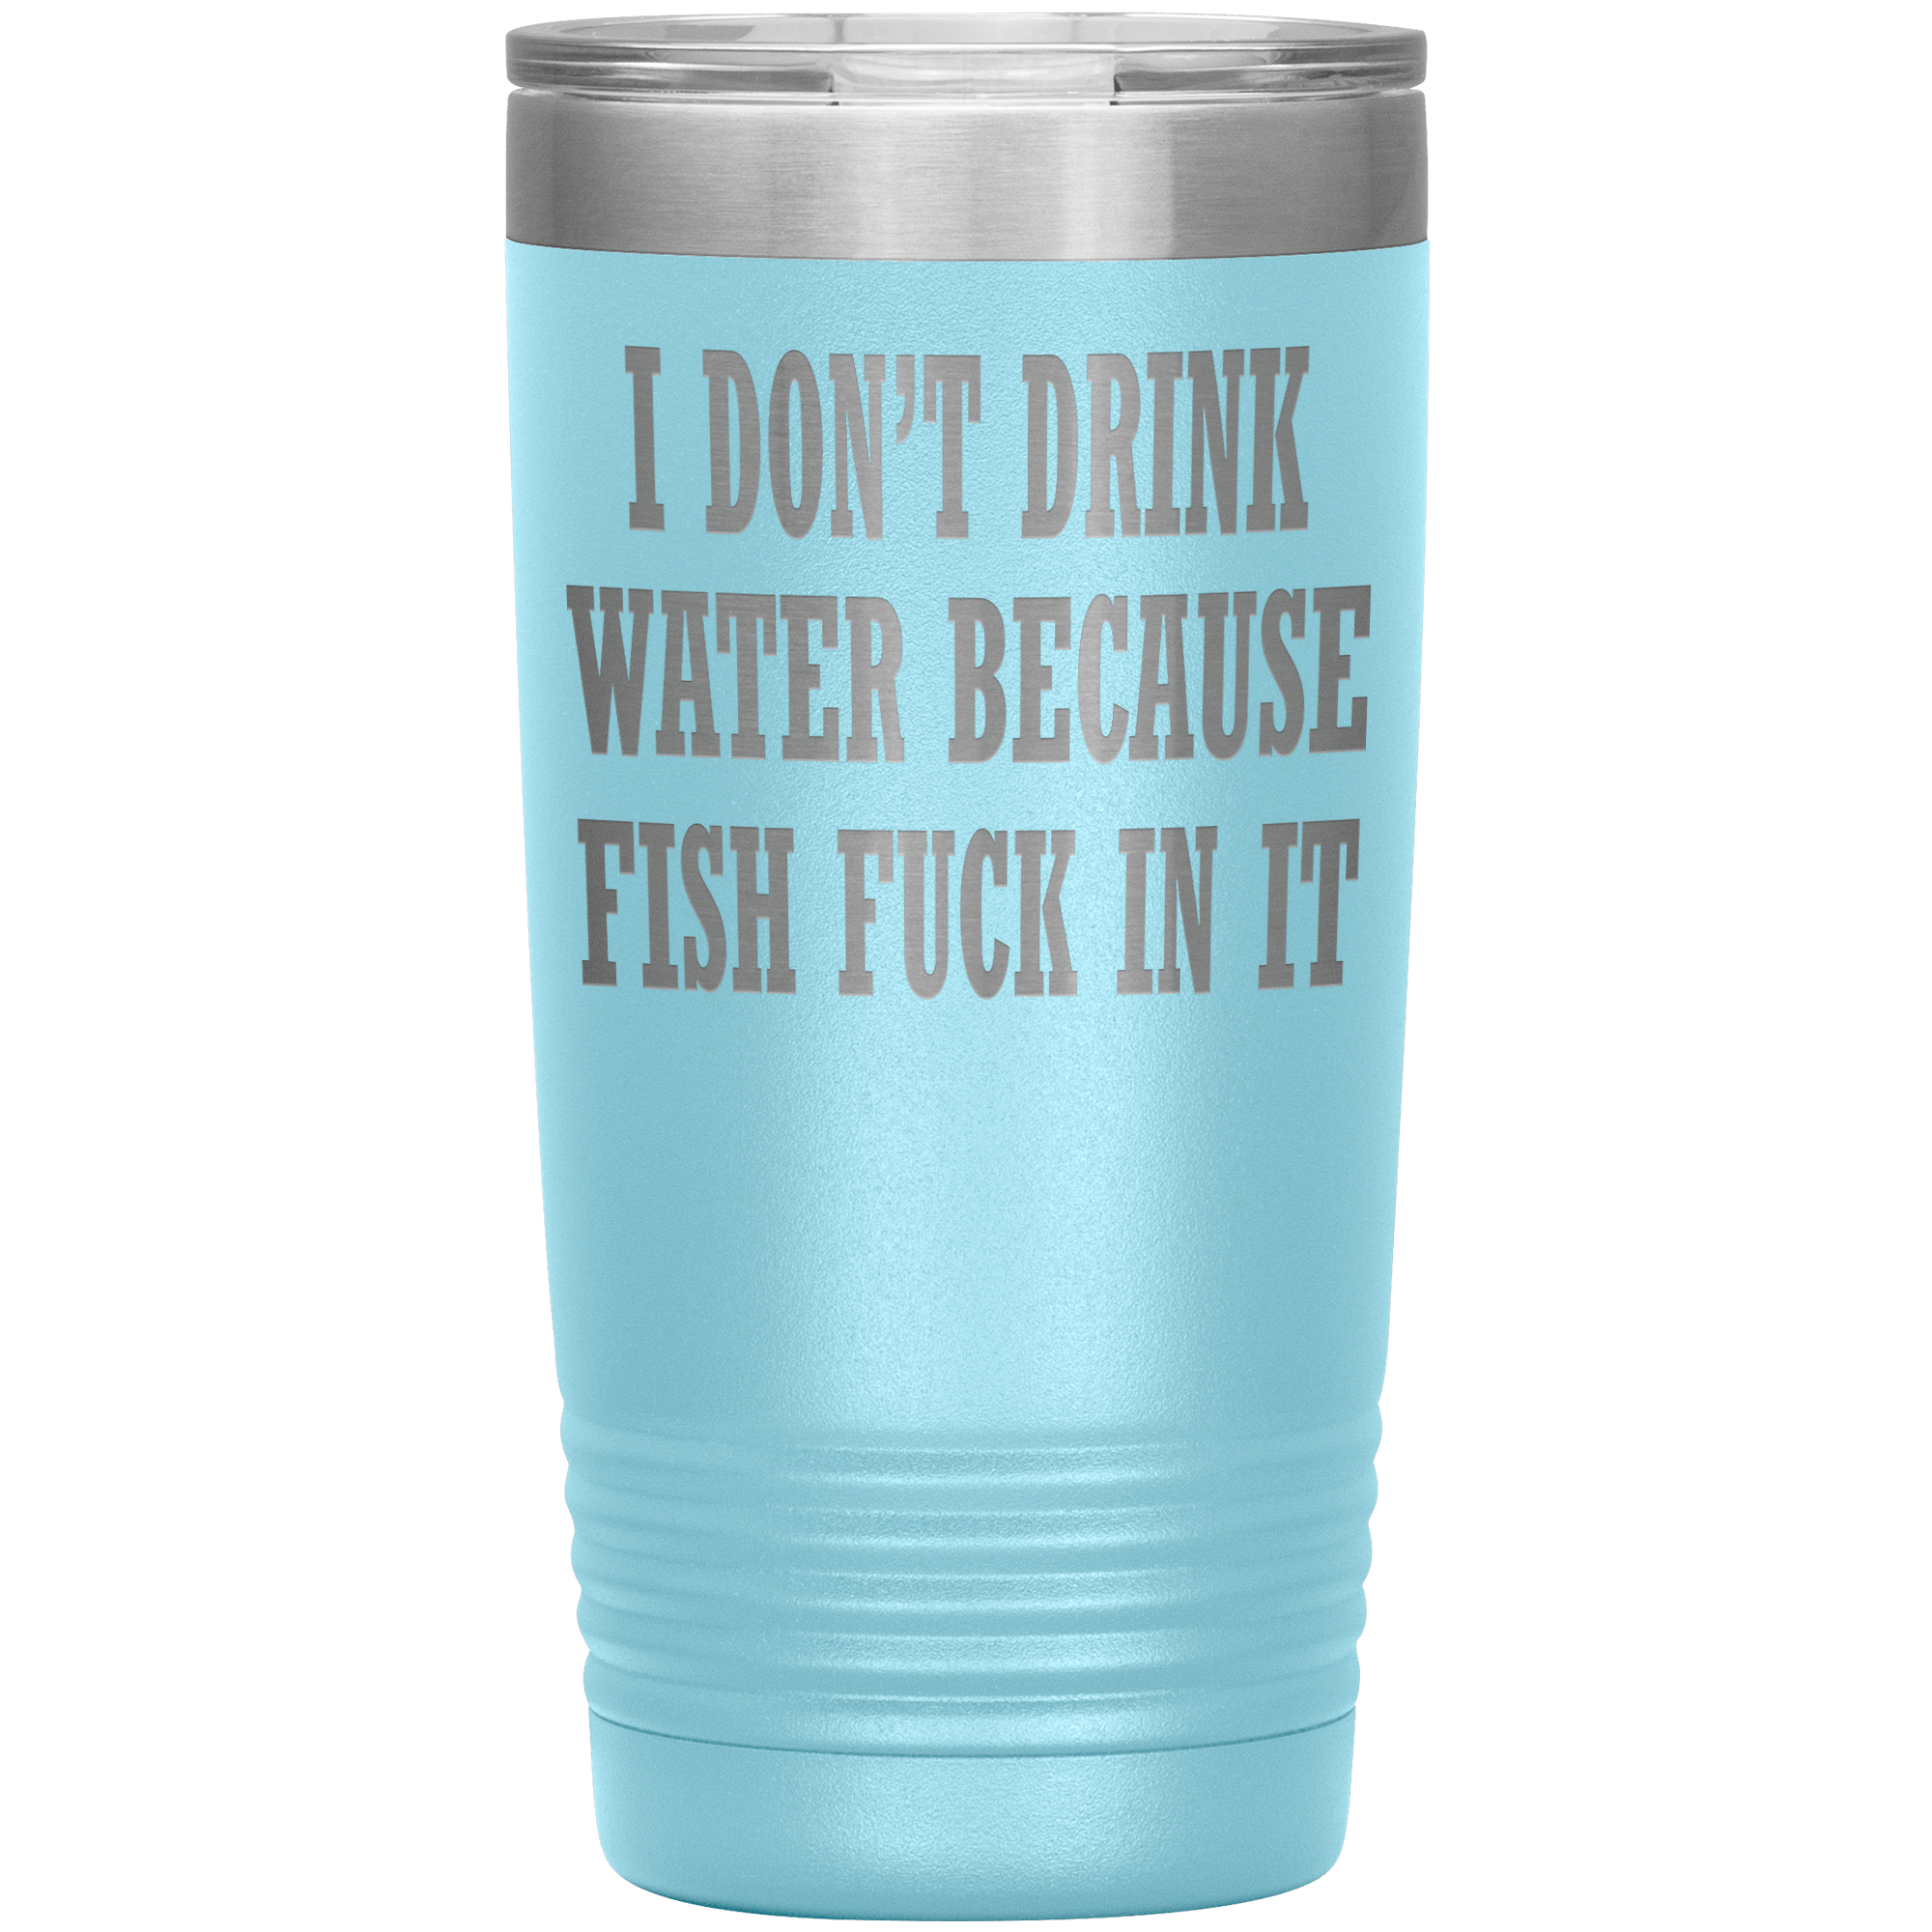 " I DON'T DRINK WATER BECAUSE FISH FUCK IN IT " TUMBLER